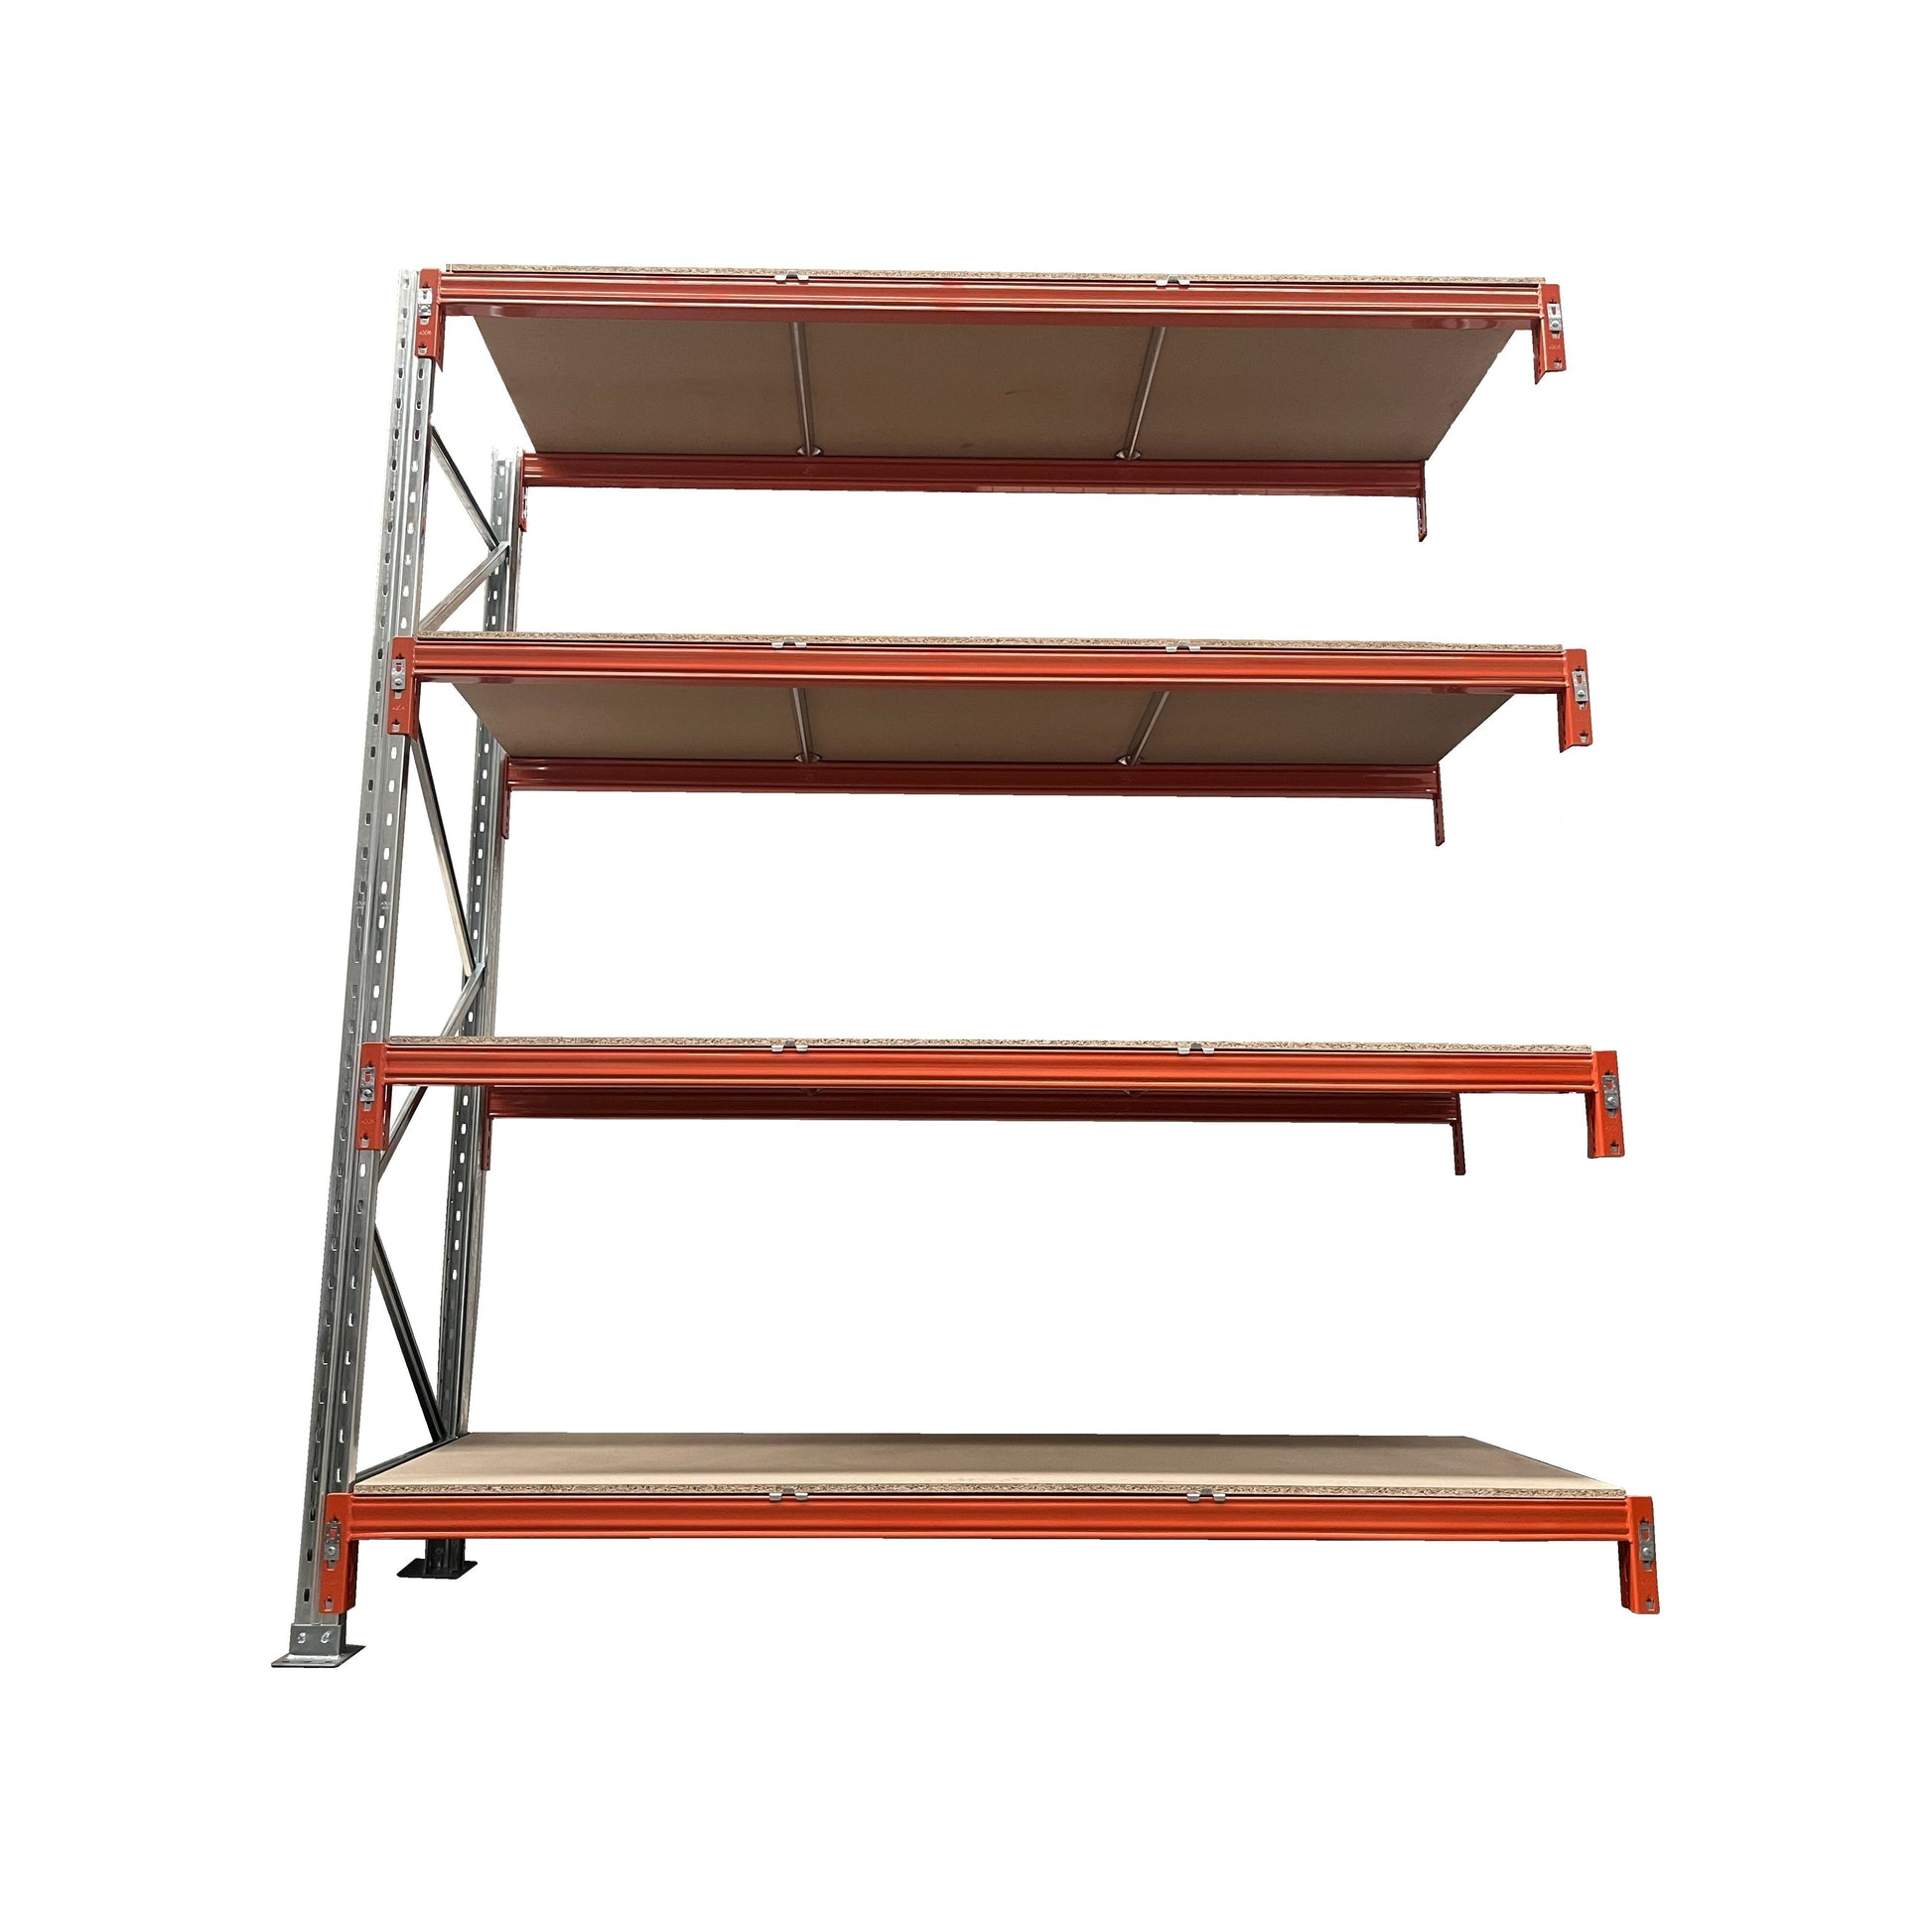 ReadyRack Pallet Racking Add On Bay 3658mm High with Board